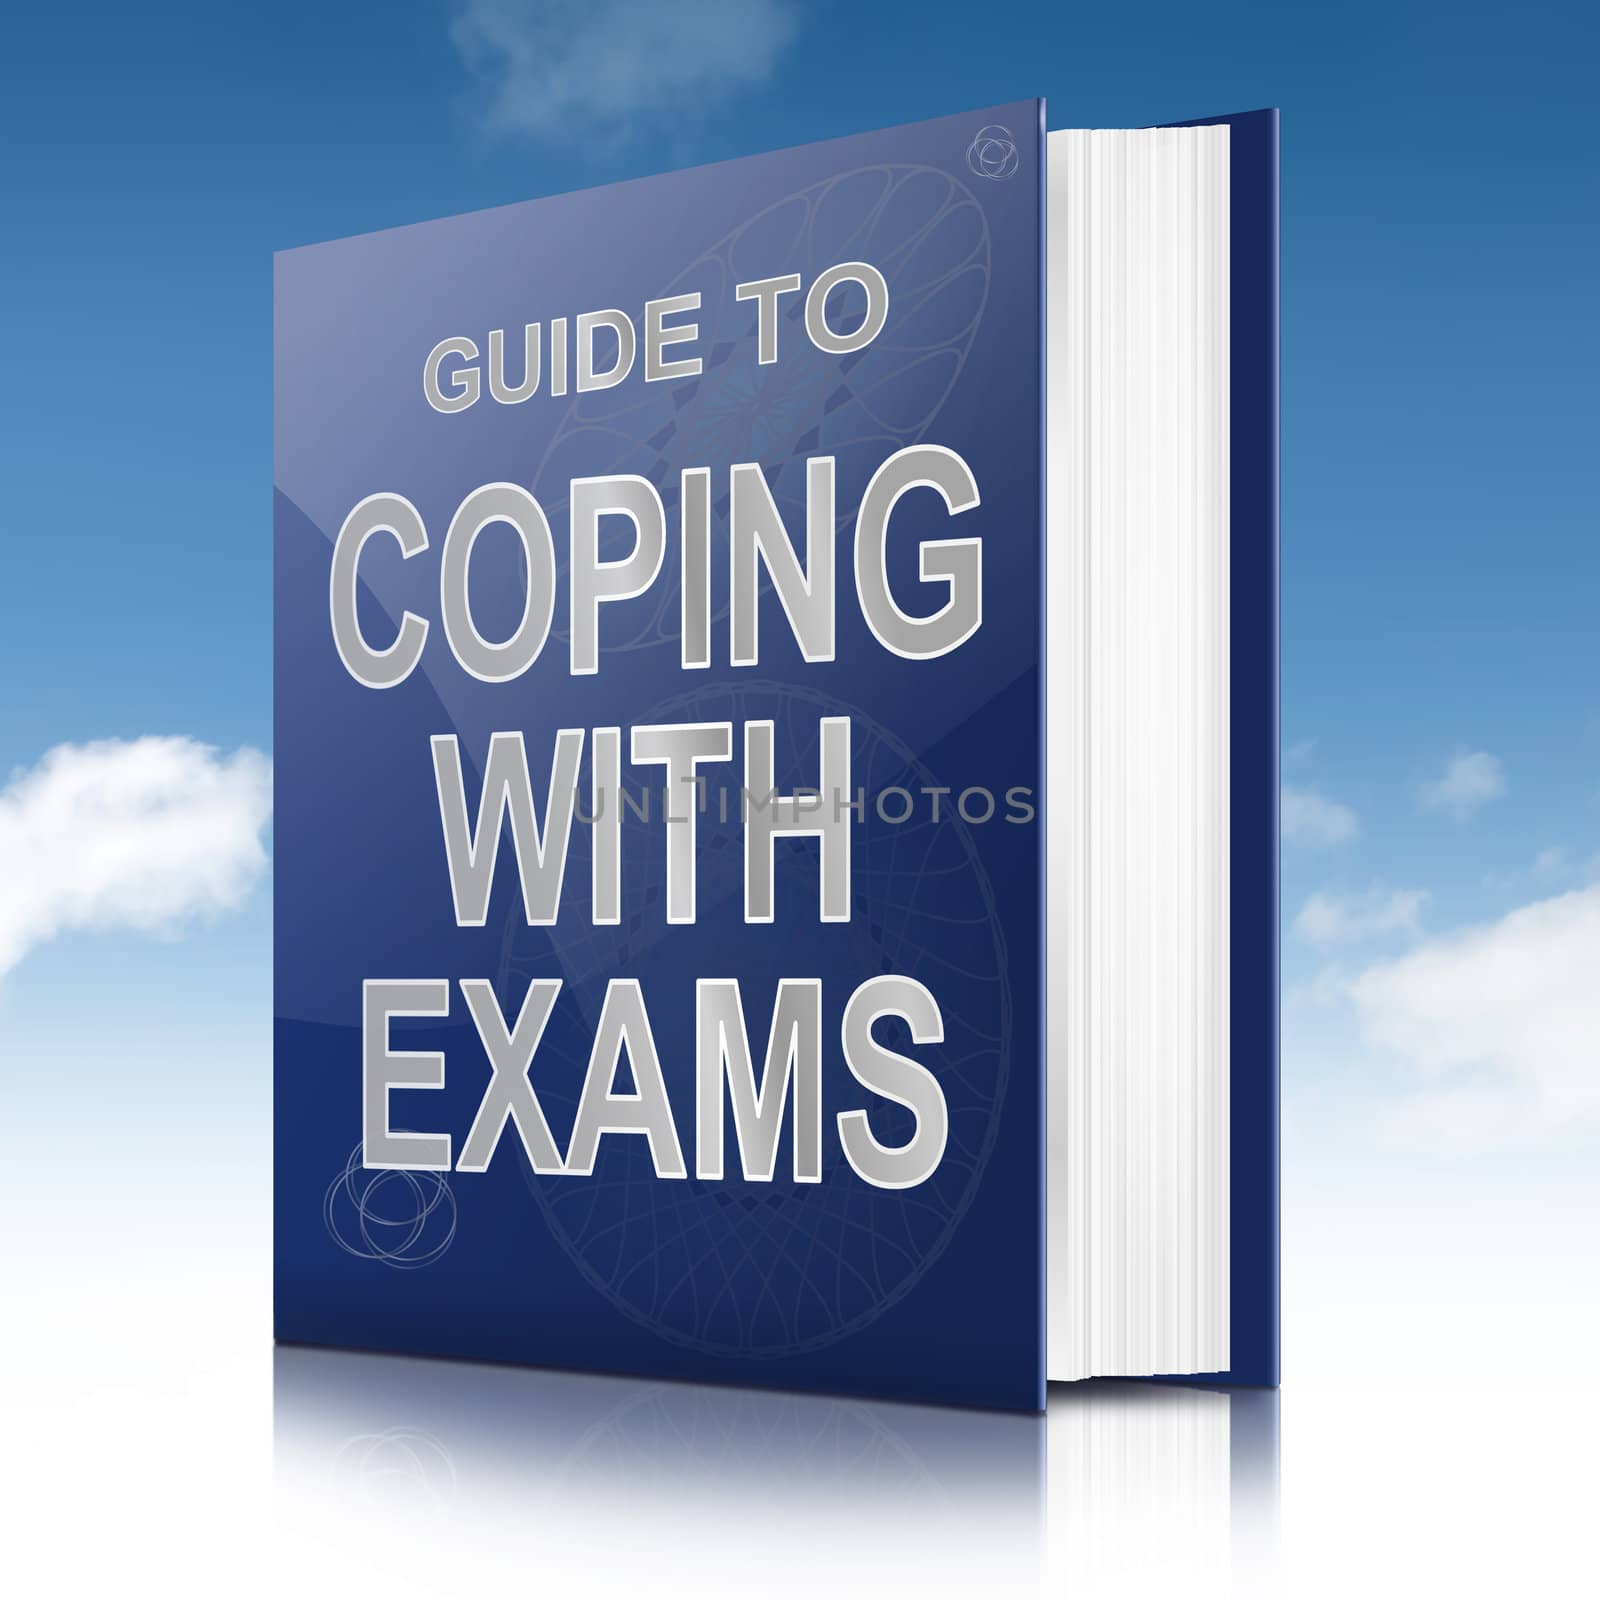 Coping with exams. by 72soul